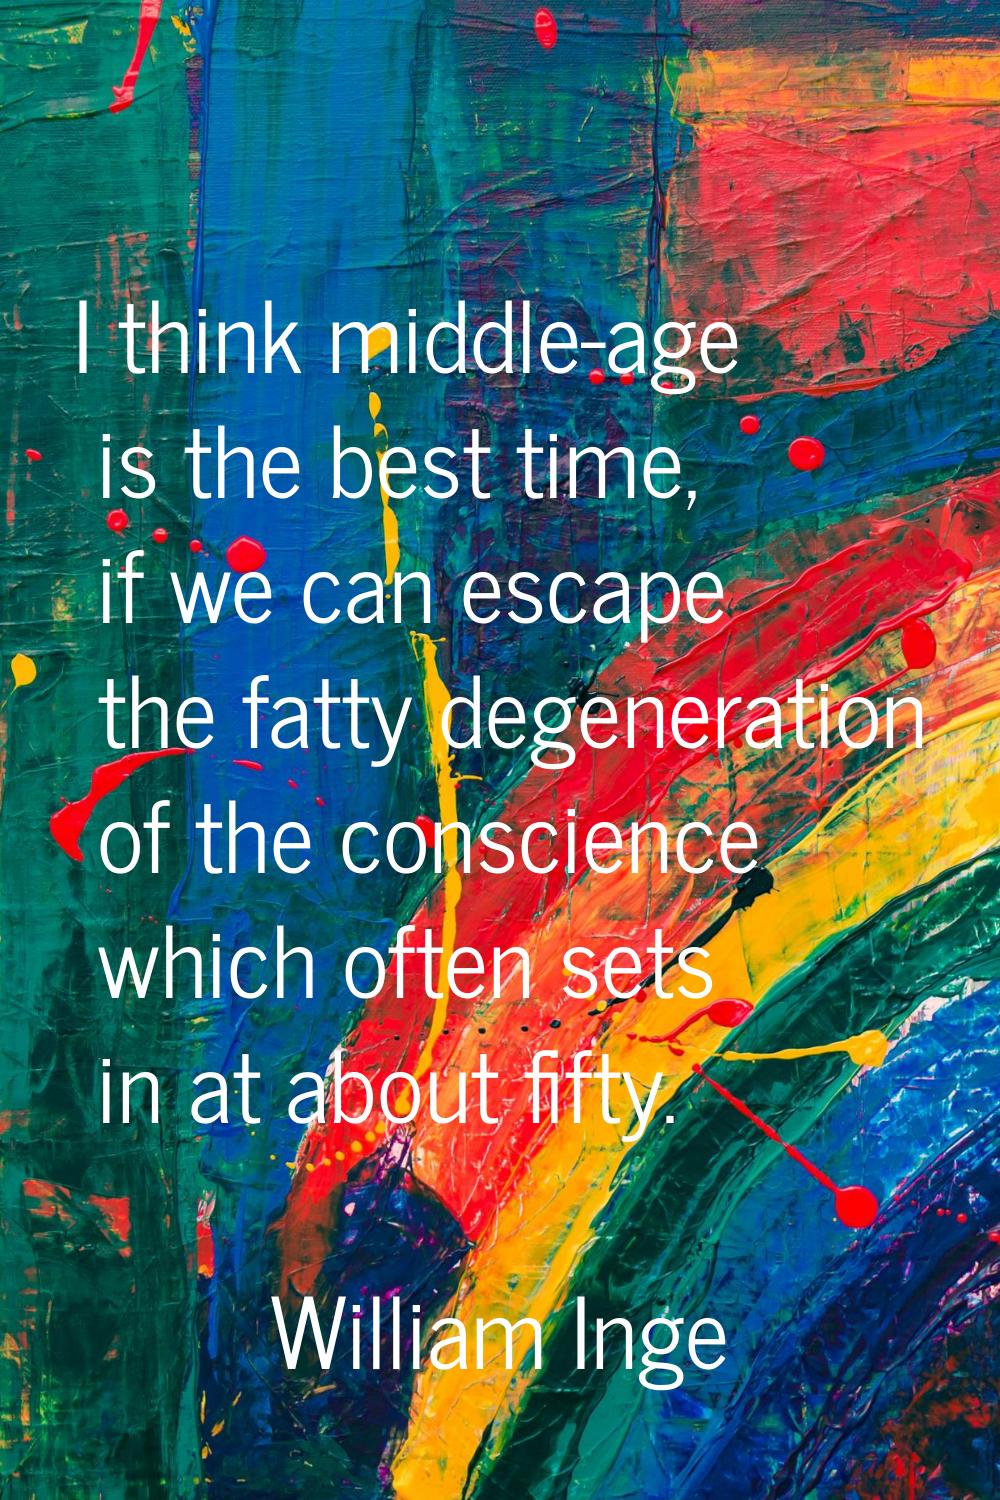 I think middle-age is the best time, if we can escape the fatty degeneration of the conscience whic